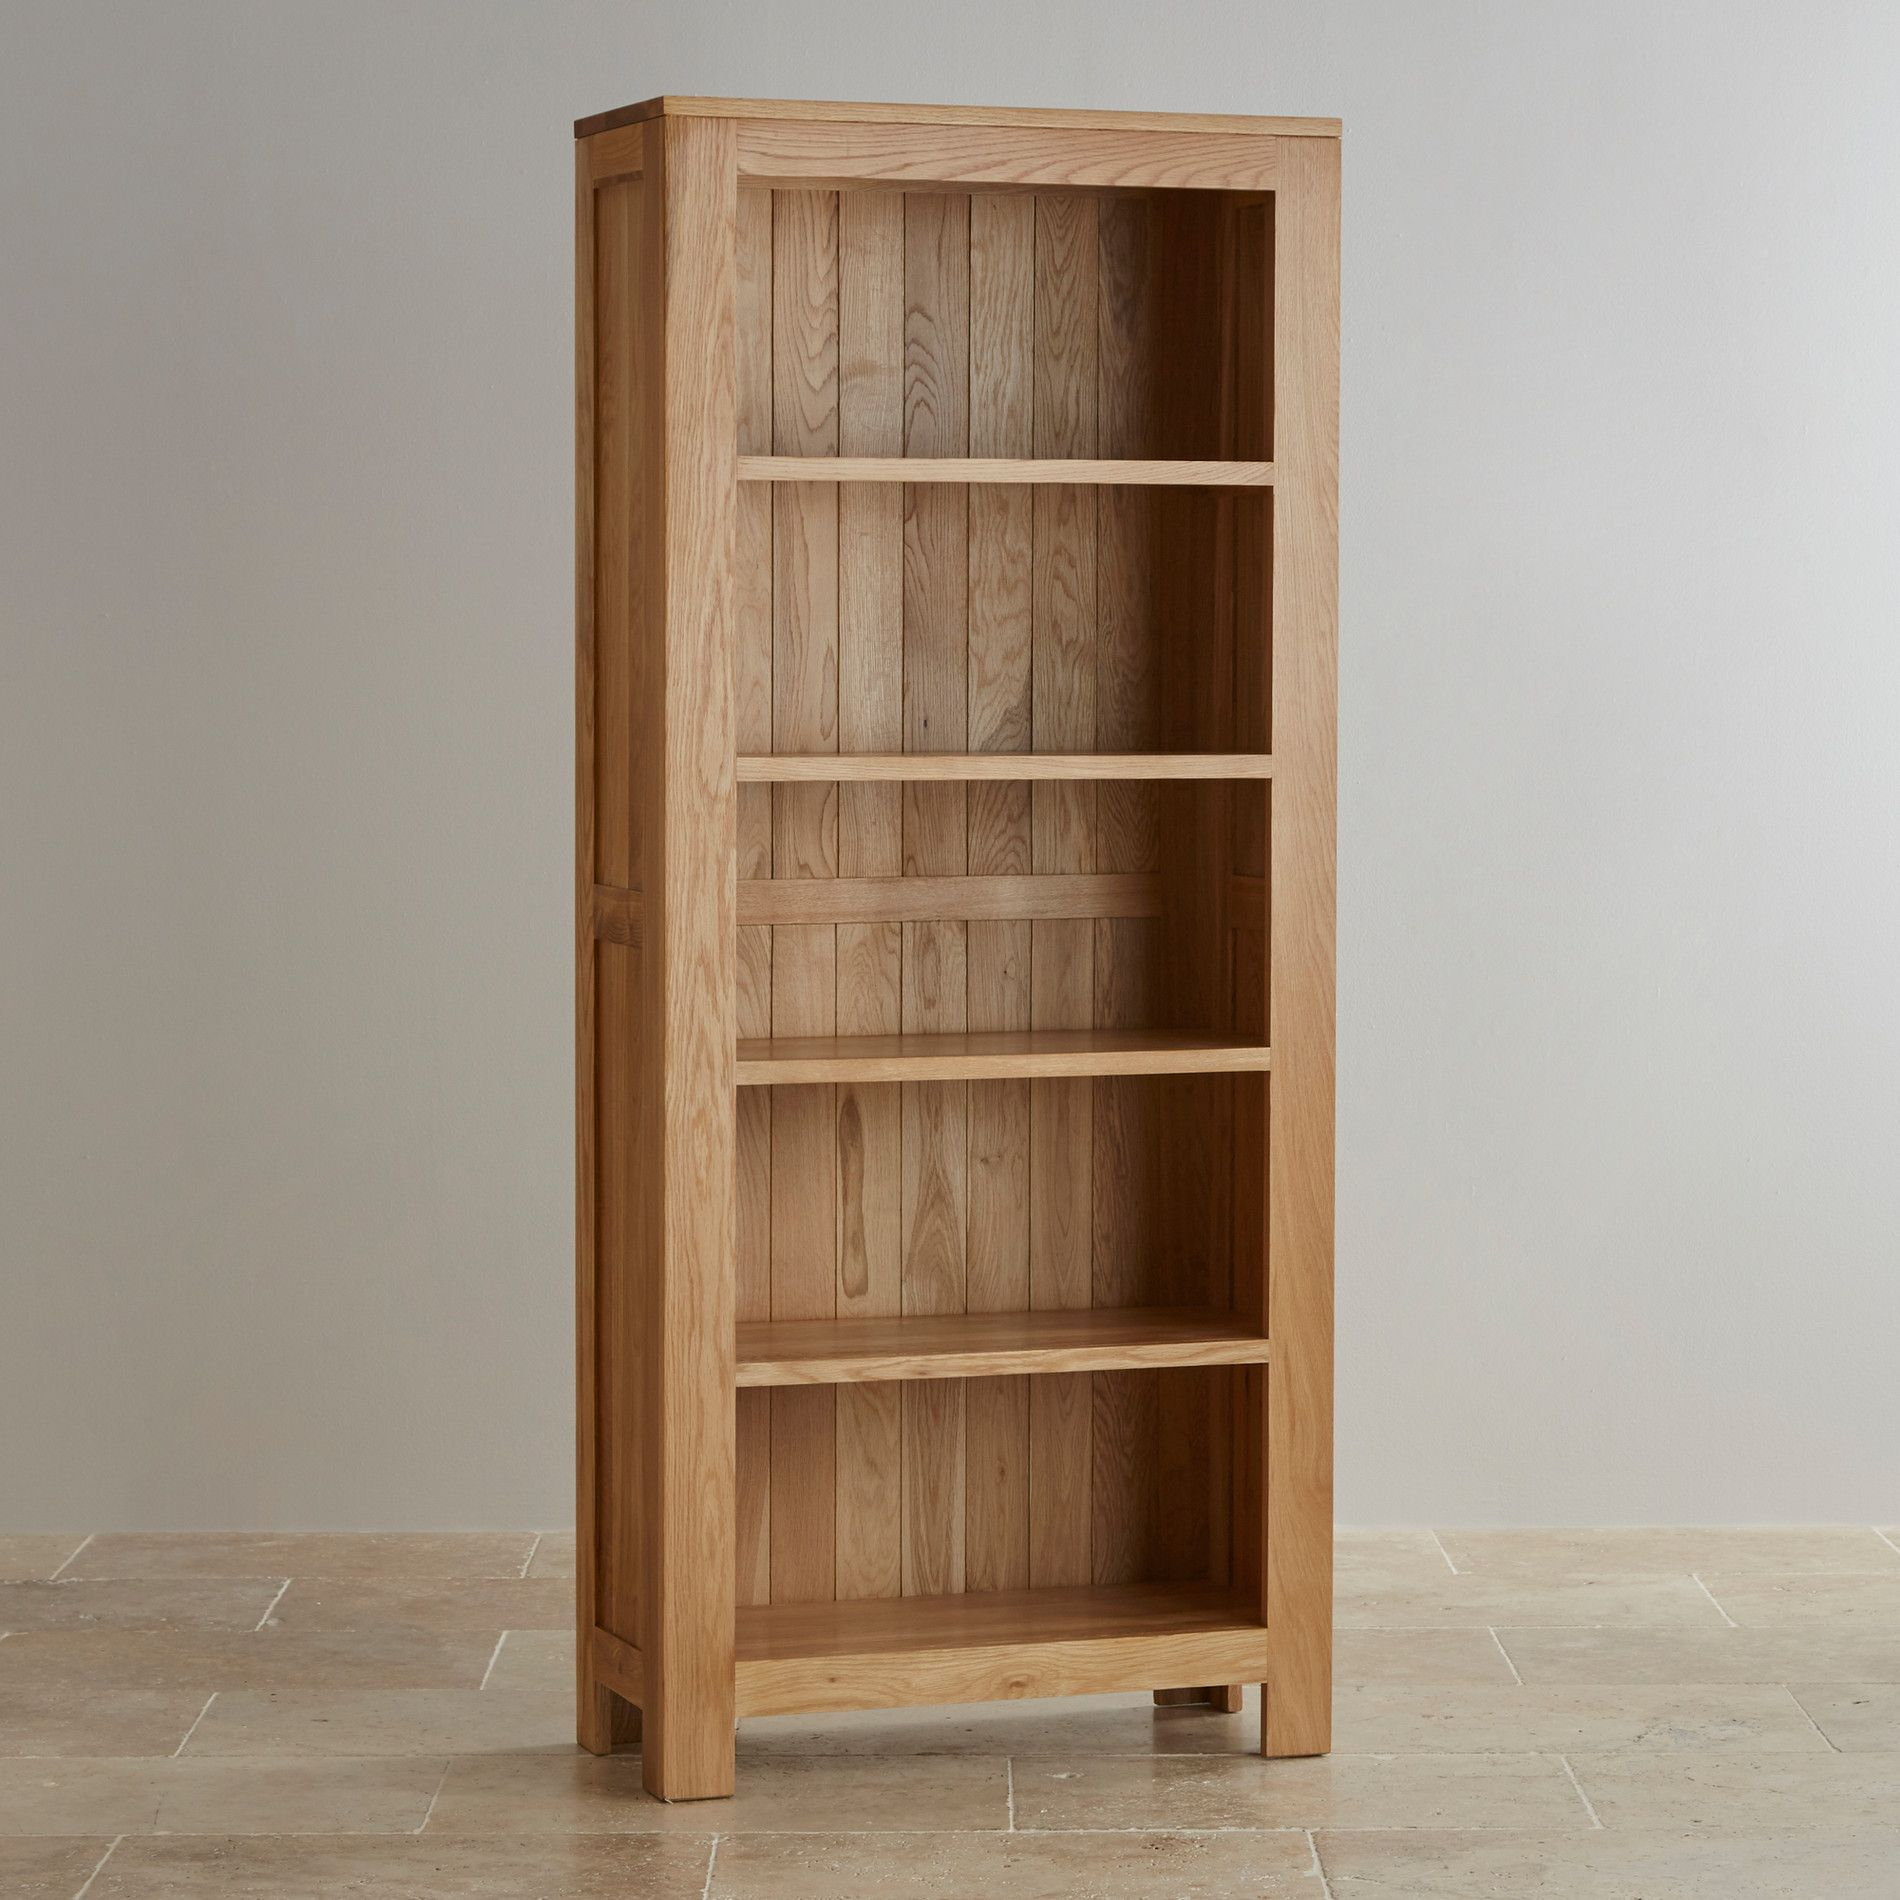 Natural Solid Oak Bookcases Tall Bookcase Oakdale Range intended for size 1900 X 1900